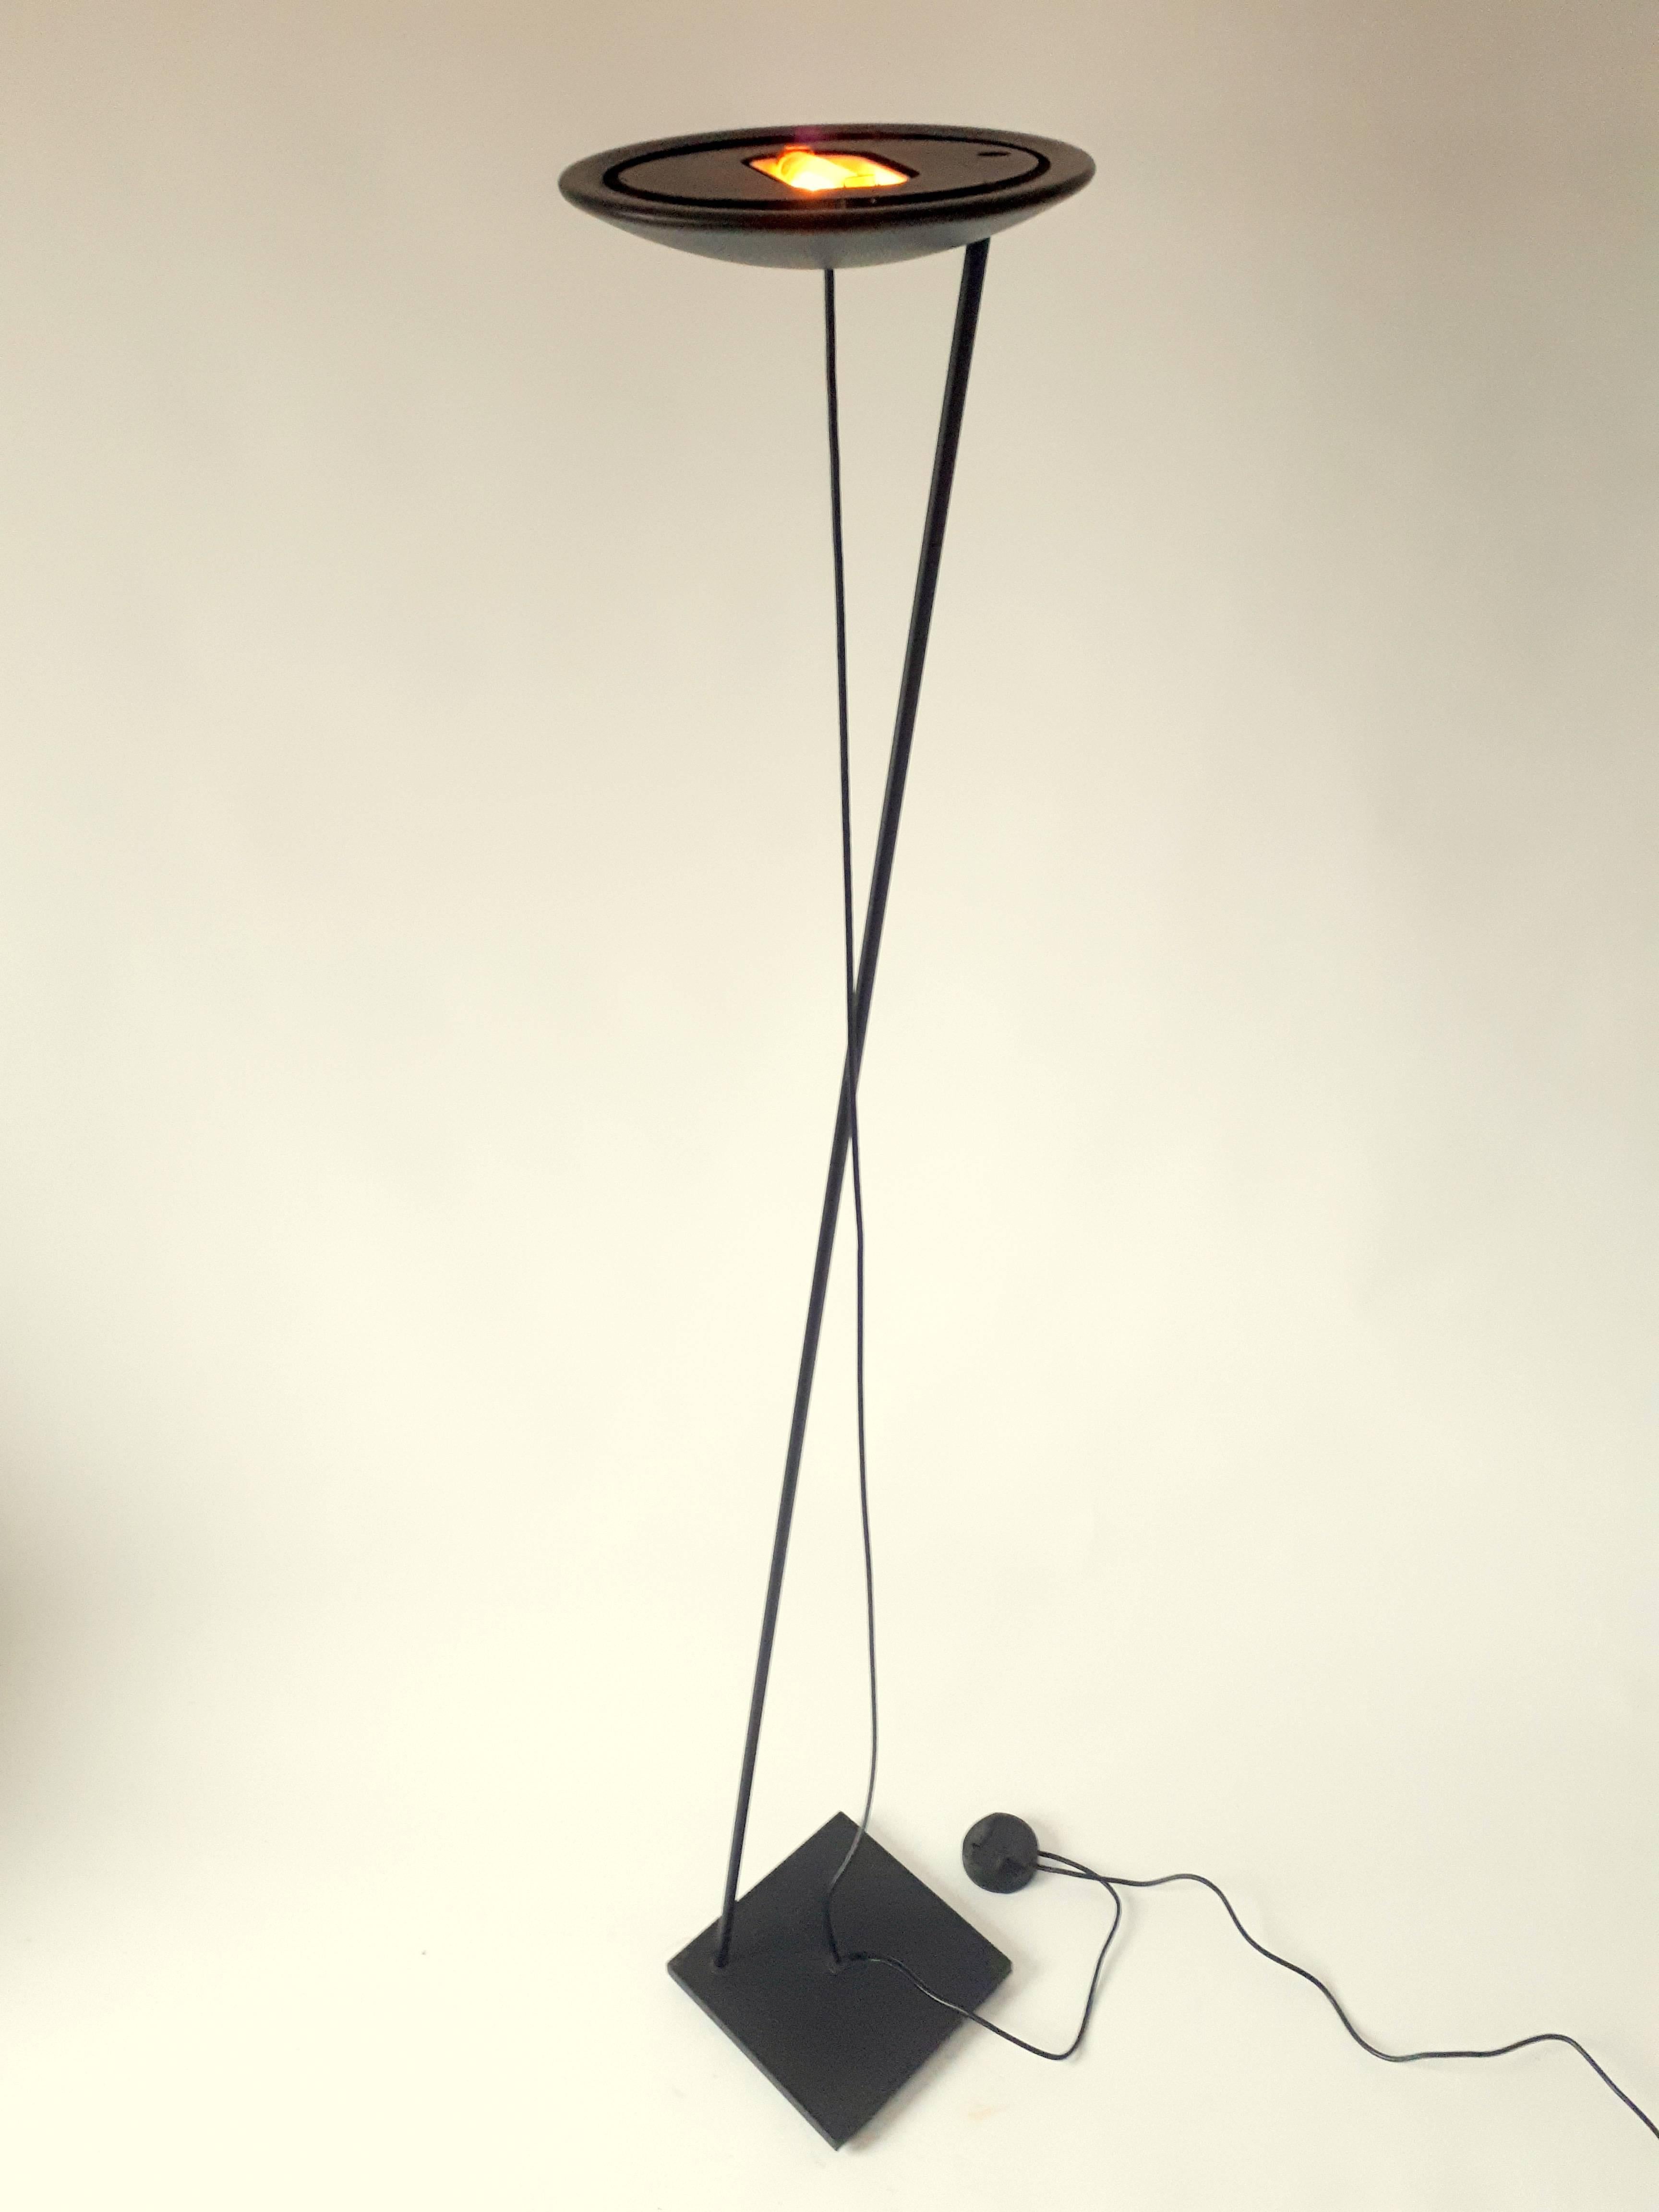 Late 20th Century 'Tao'  Modern Halogen Torchiere Floor Lamp from Paf Studio, 1980, Italy